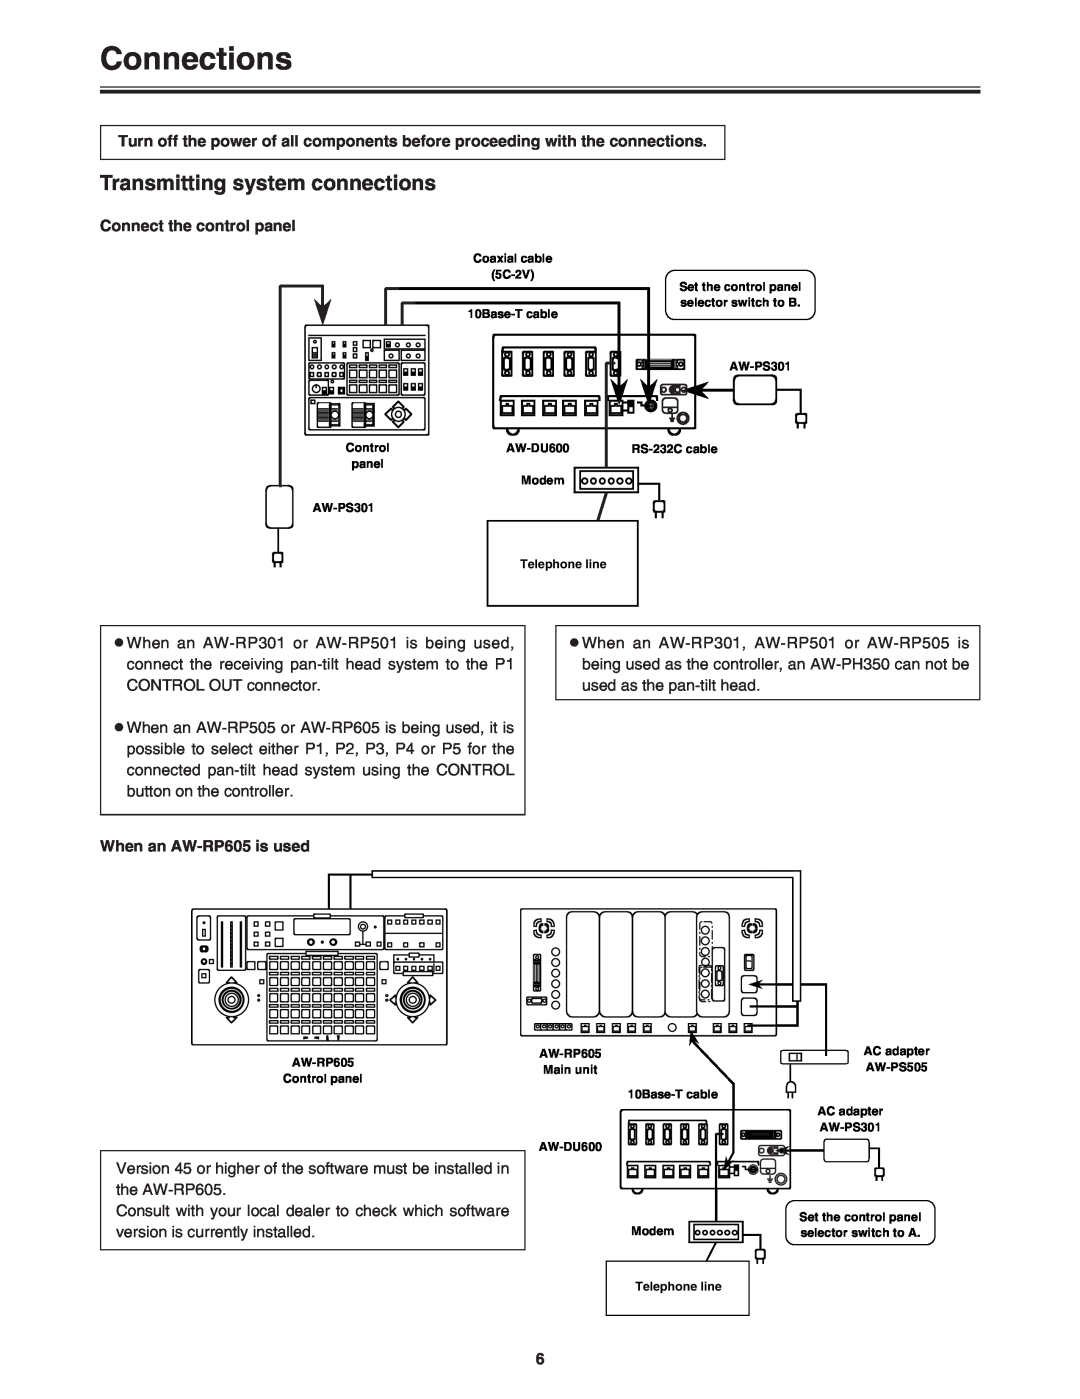 Panasonic AW-DU600 manual Connections, Transmitting system connections 